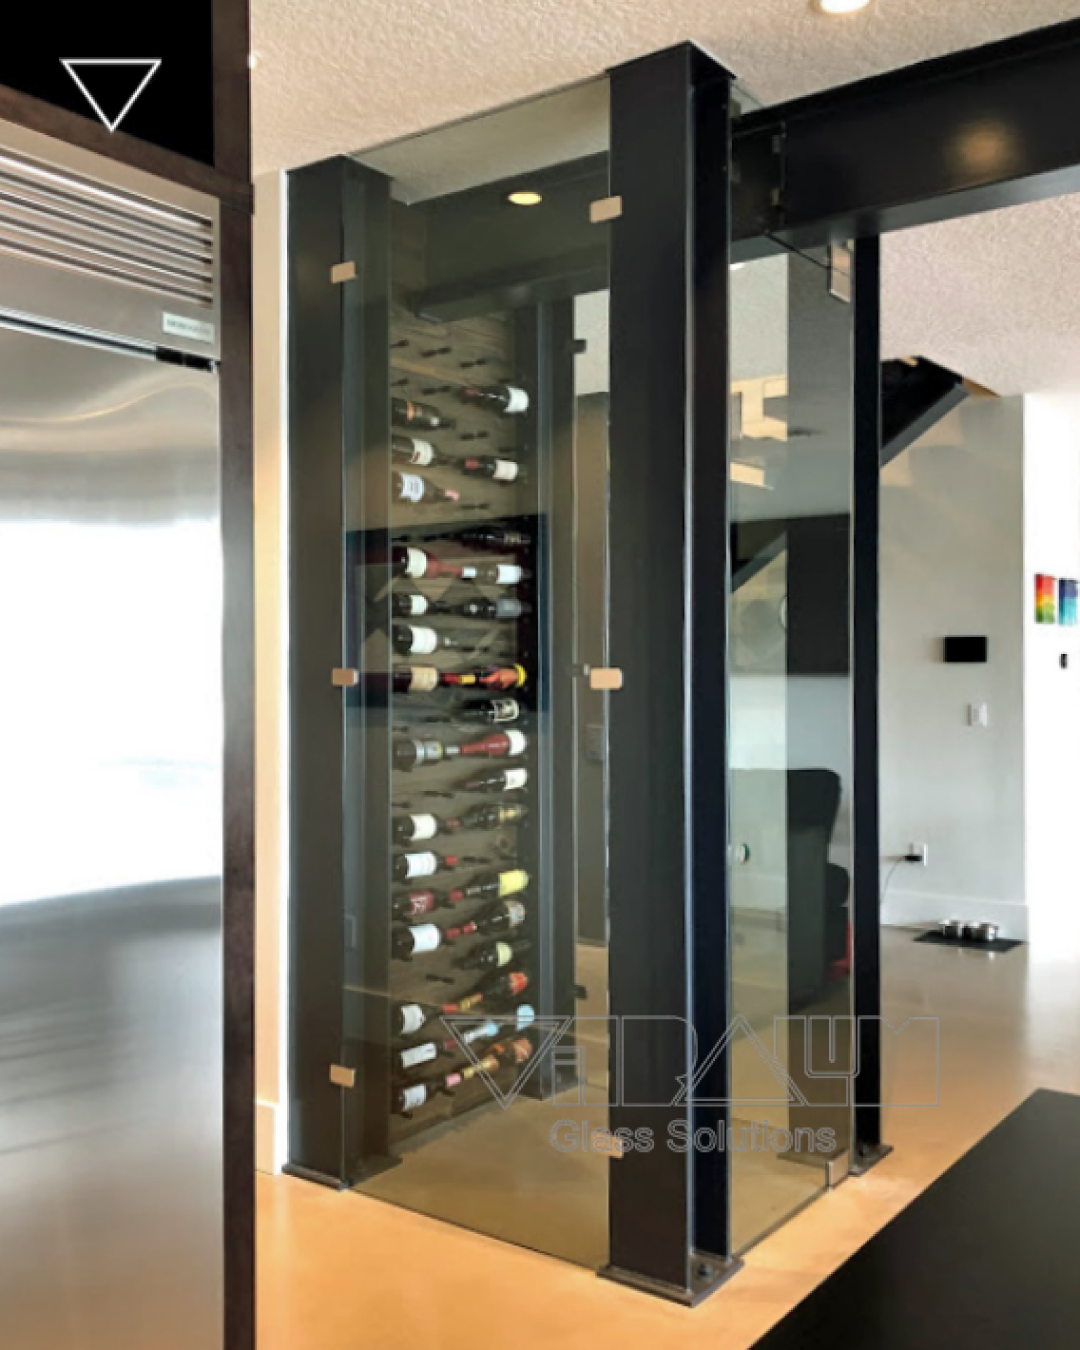 Our wine cellars are made with tempered glass, which is incredibly durable. This means they're safe and will keep your wine at the perfect temperature for years to come.